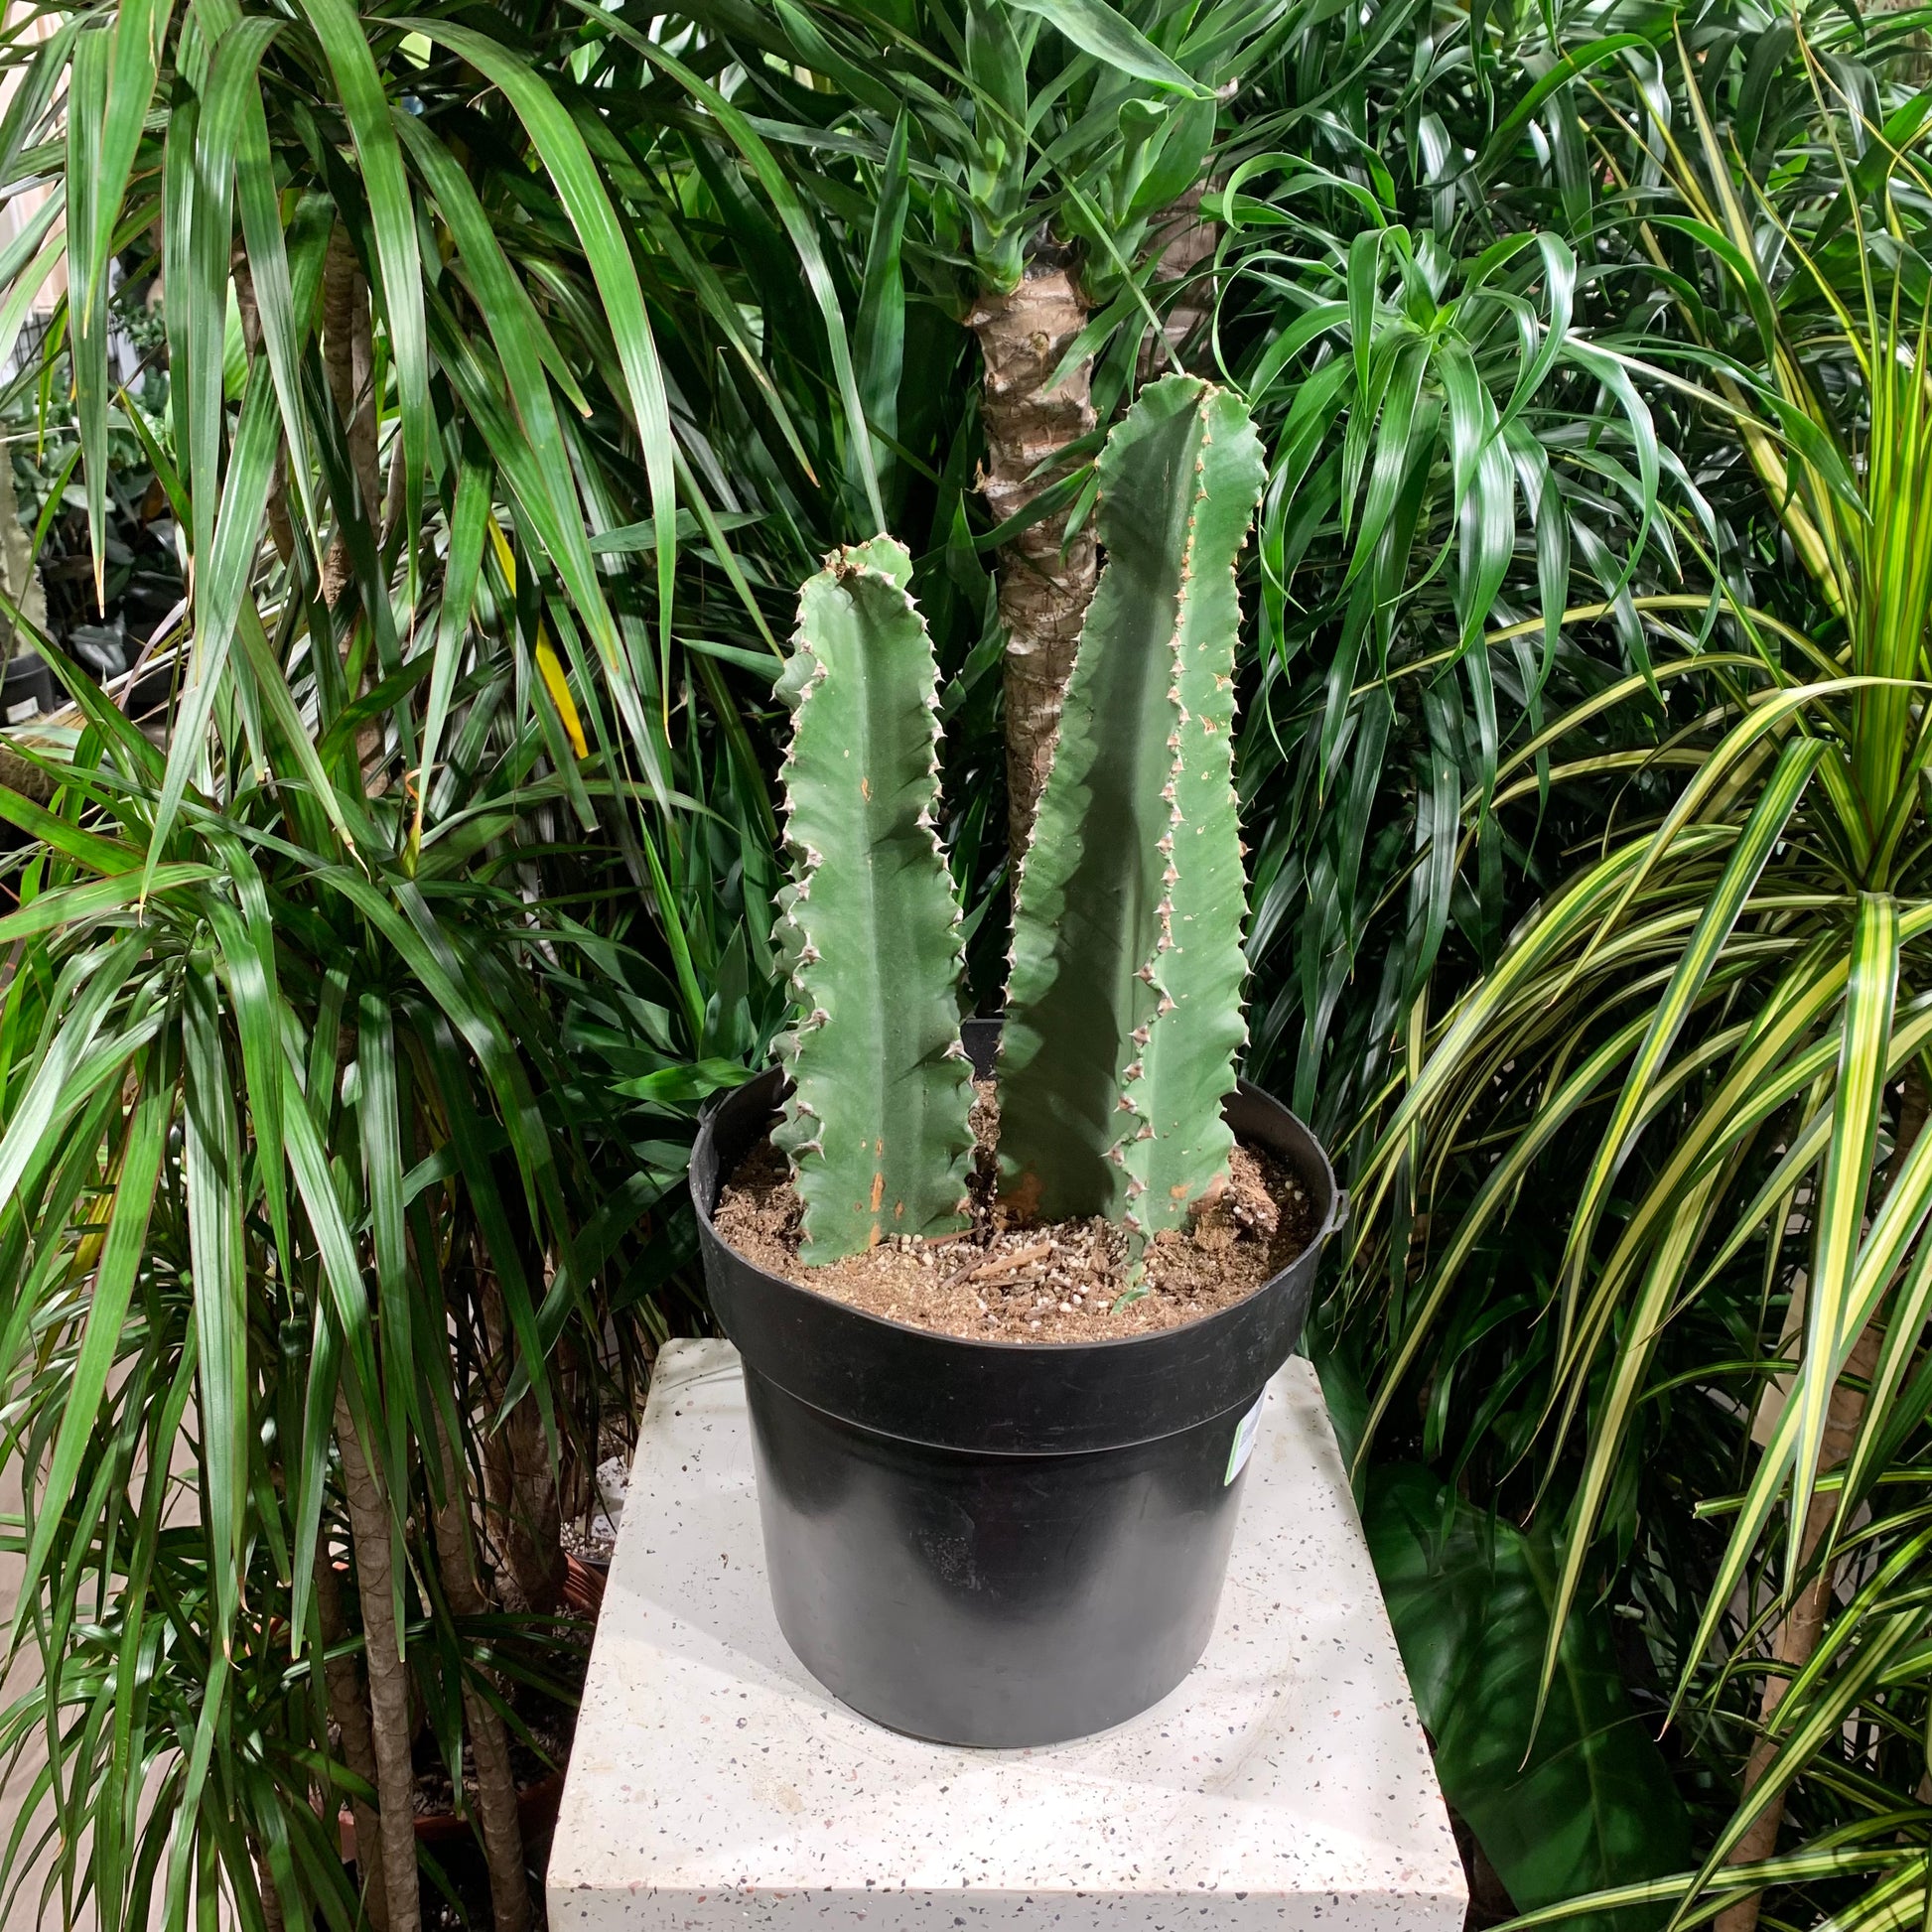 Ammak, Candelabra Spurge (Euphorbia ammak) in a 10 inch pot. Indoor plant for sale by Promise Supply for delivery and pickup in Toronto